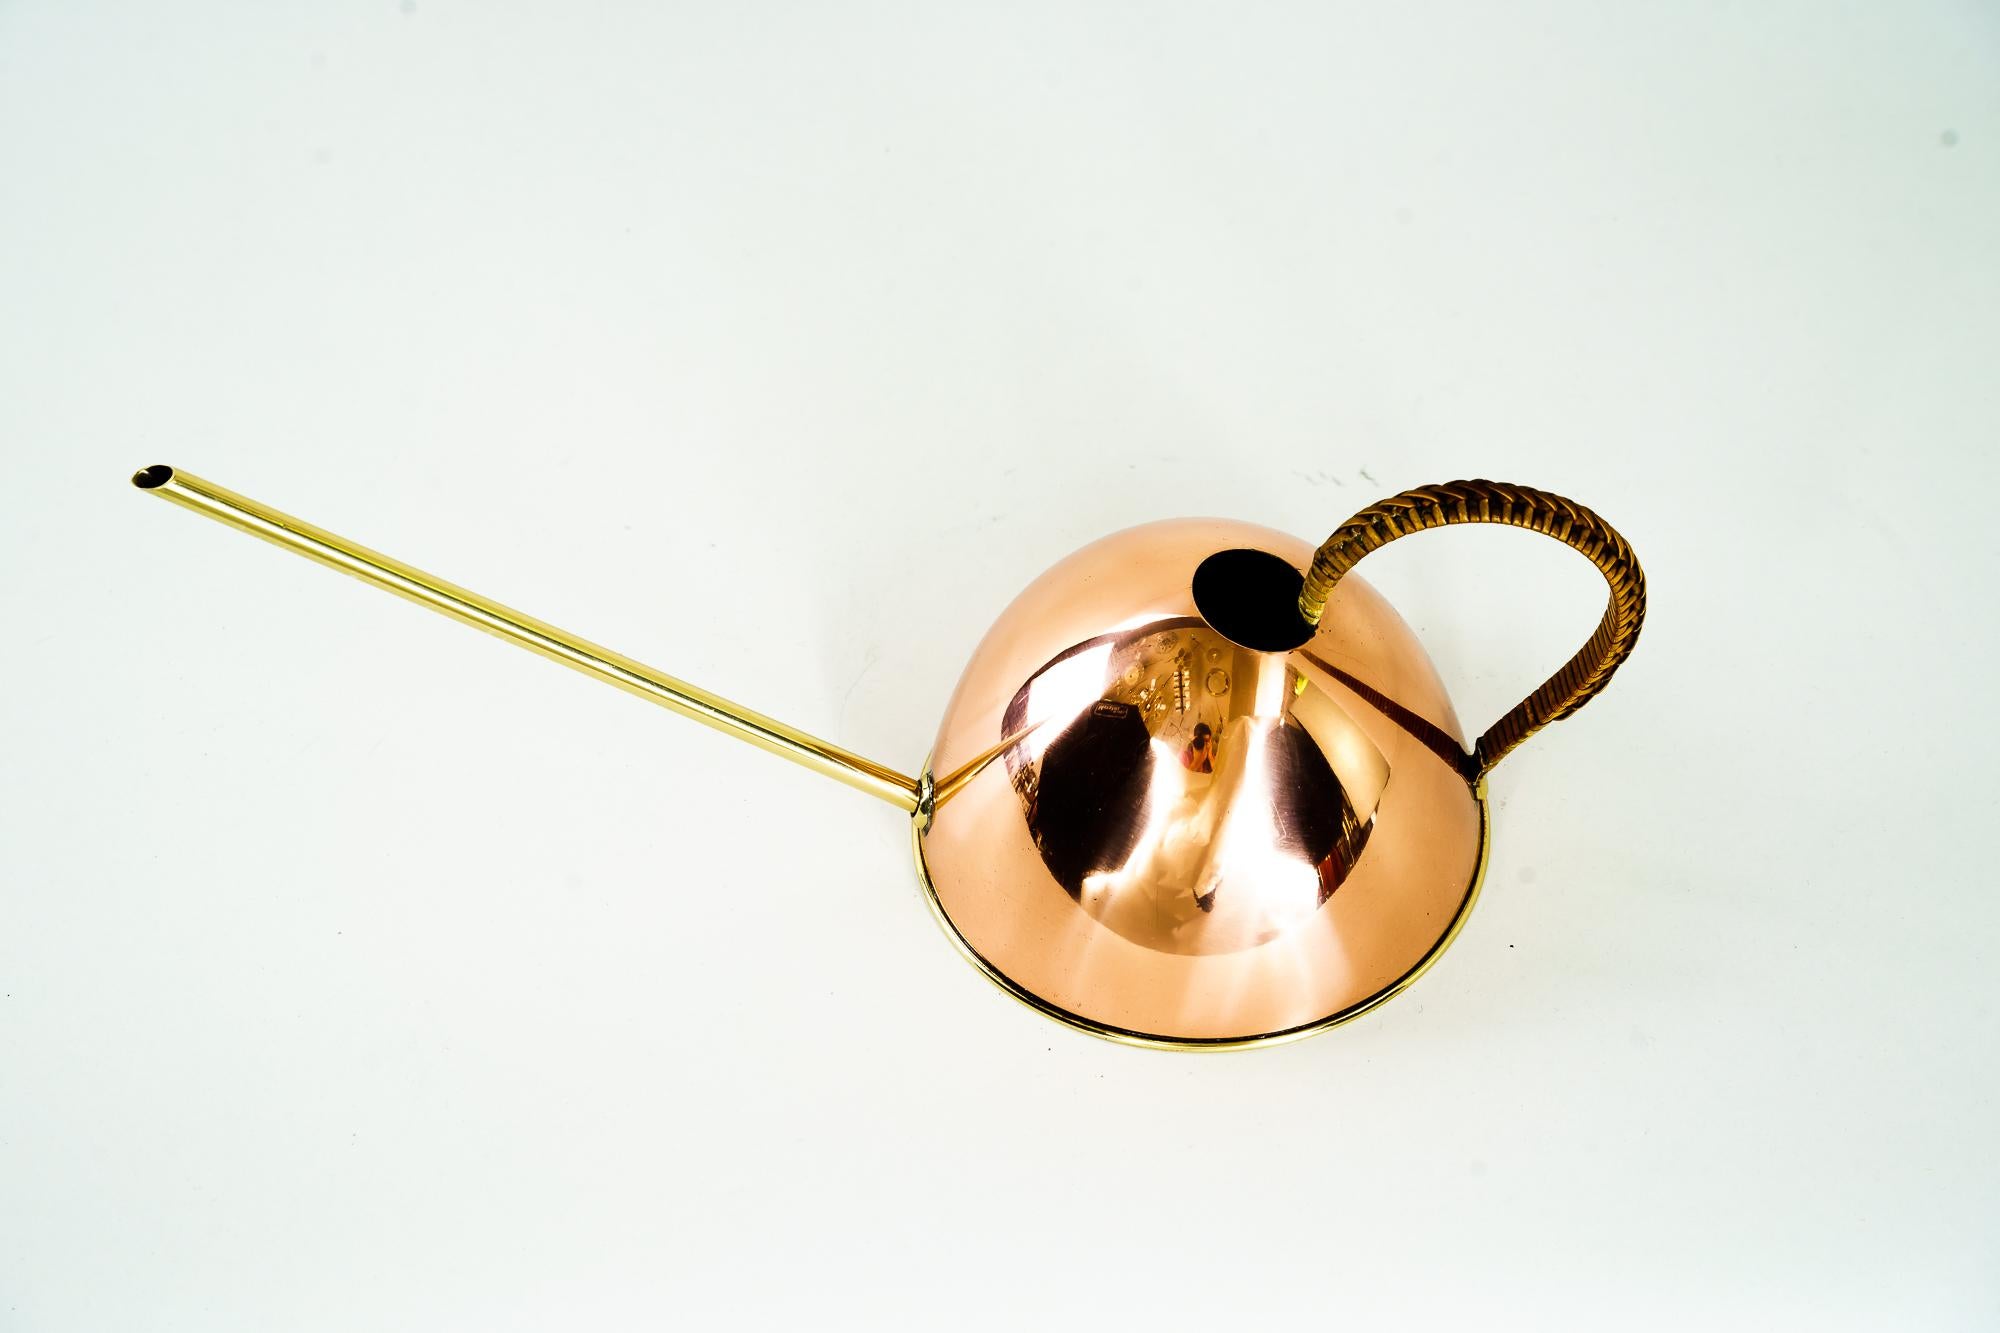 Watering can, Vienna, around 1960s
copper and brass 
Polished and stove enamelled.